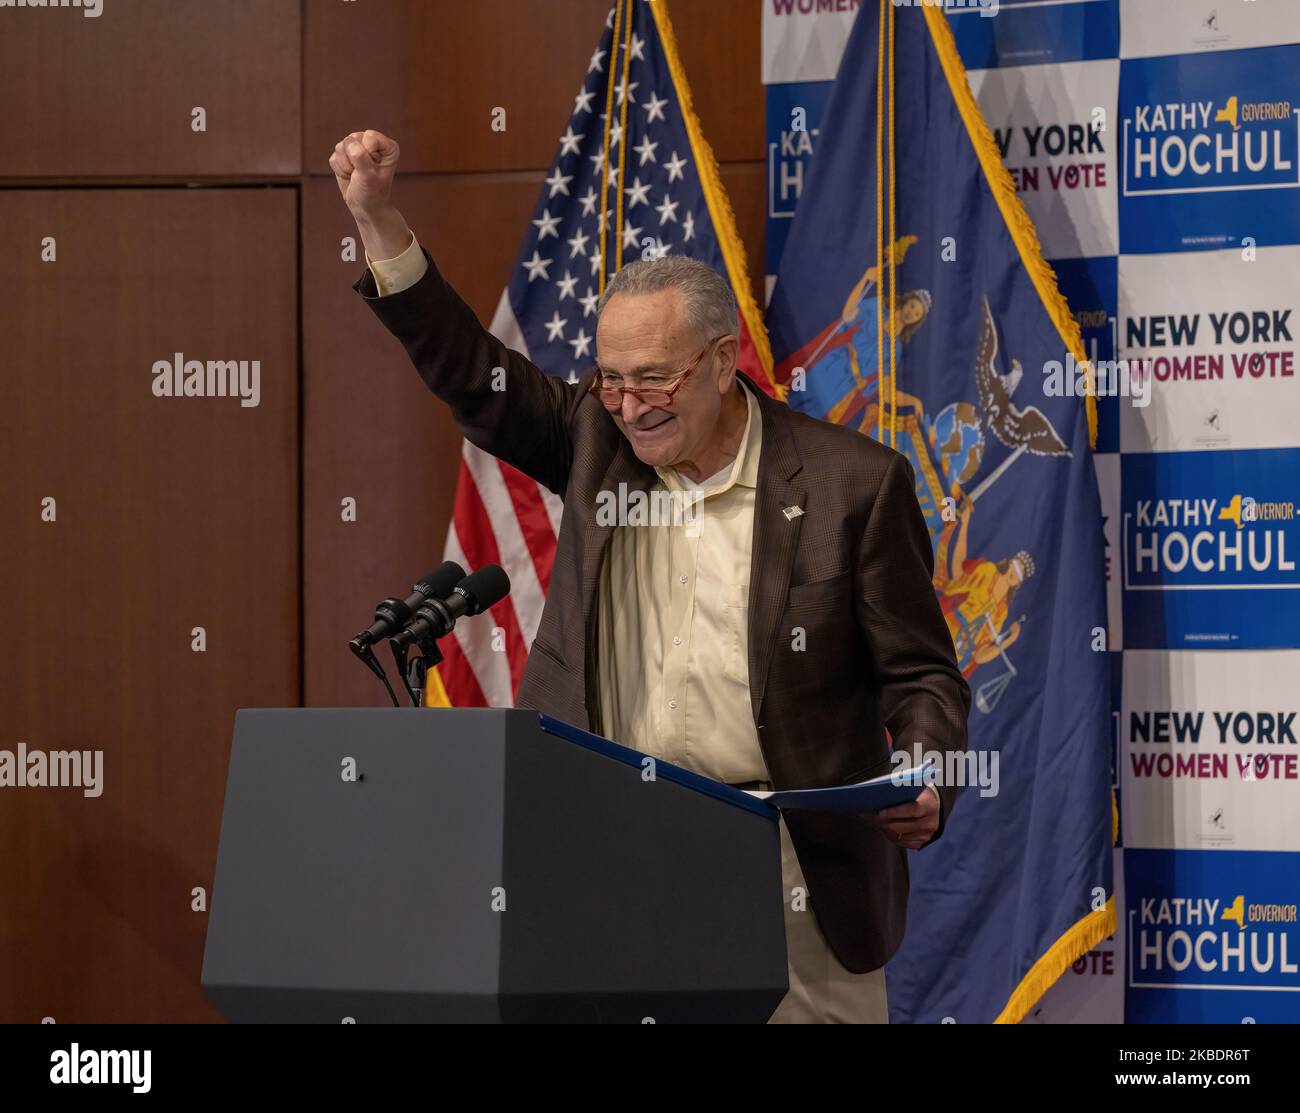 NEW YORK, N.Y. – November 3, 2022: Senate Majority Leader Chuck Schumer addresses a campaign rally at Barnard College in New York City. Stock Photo